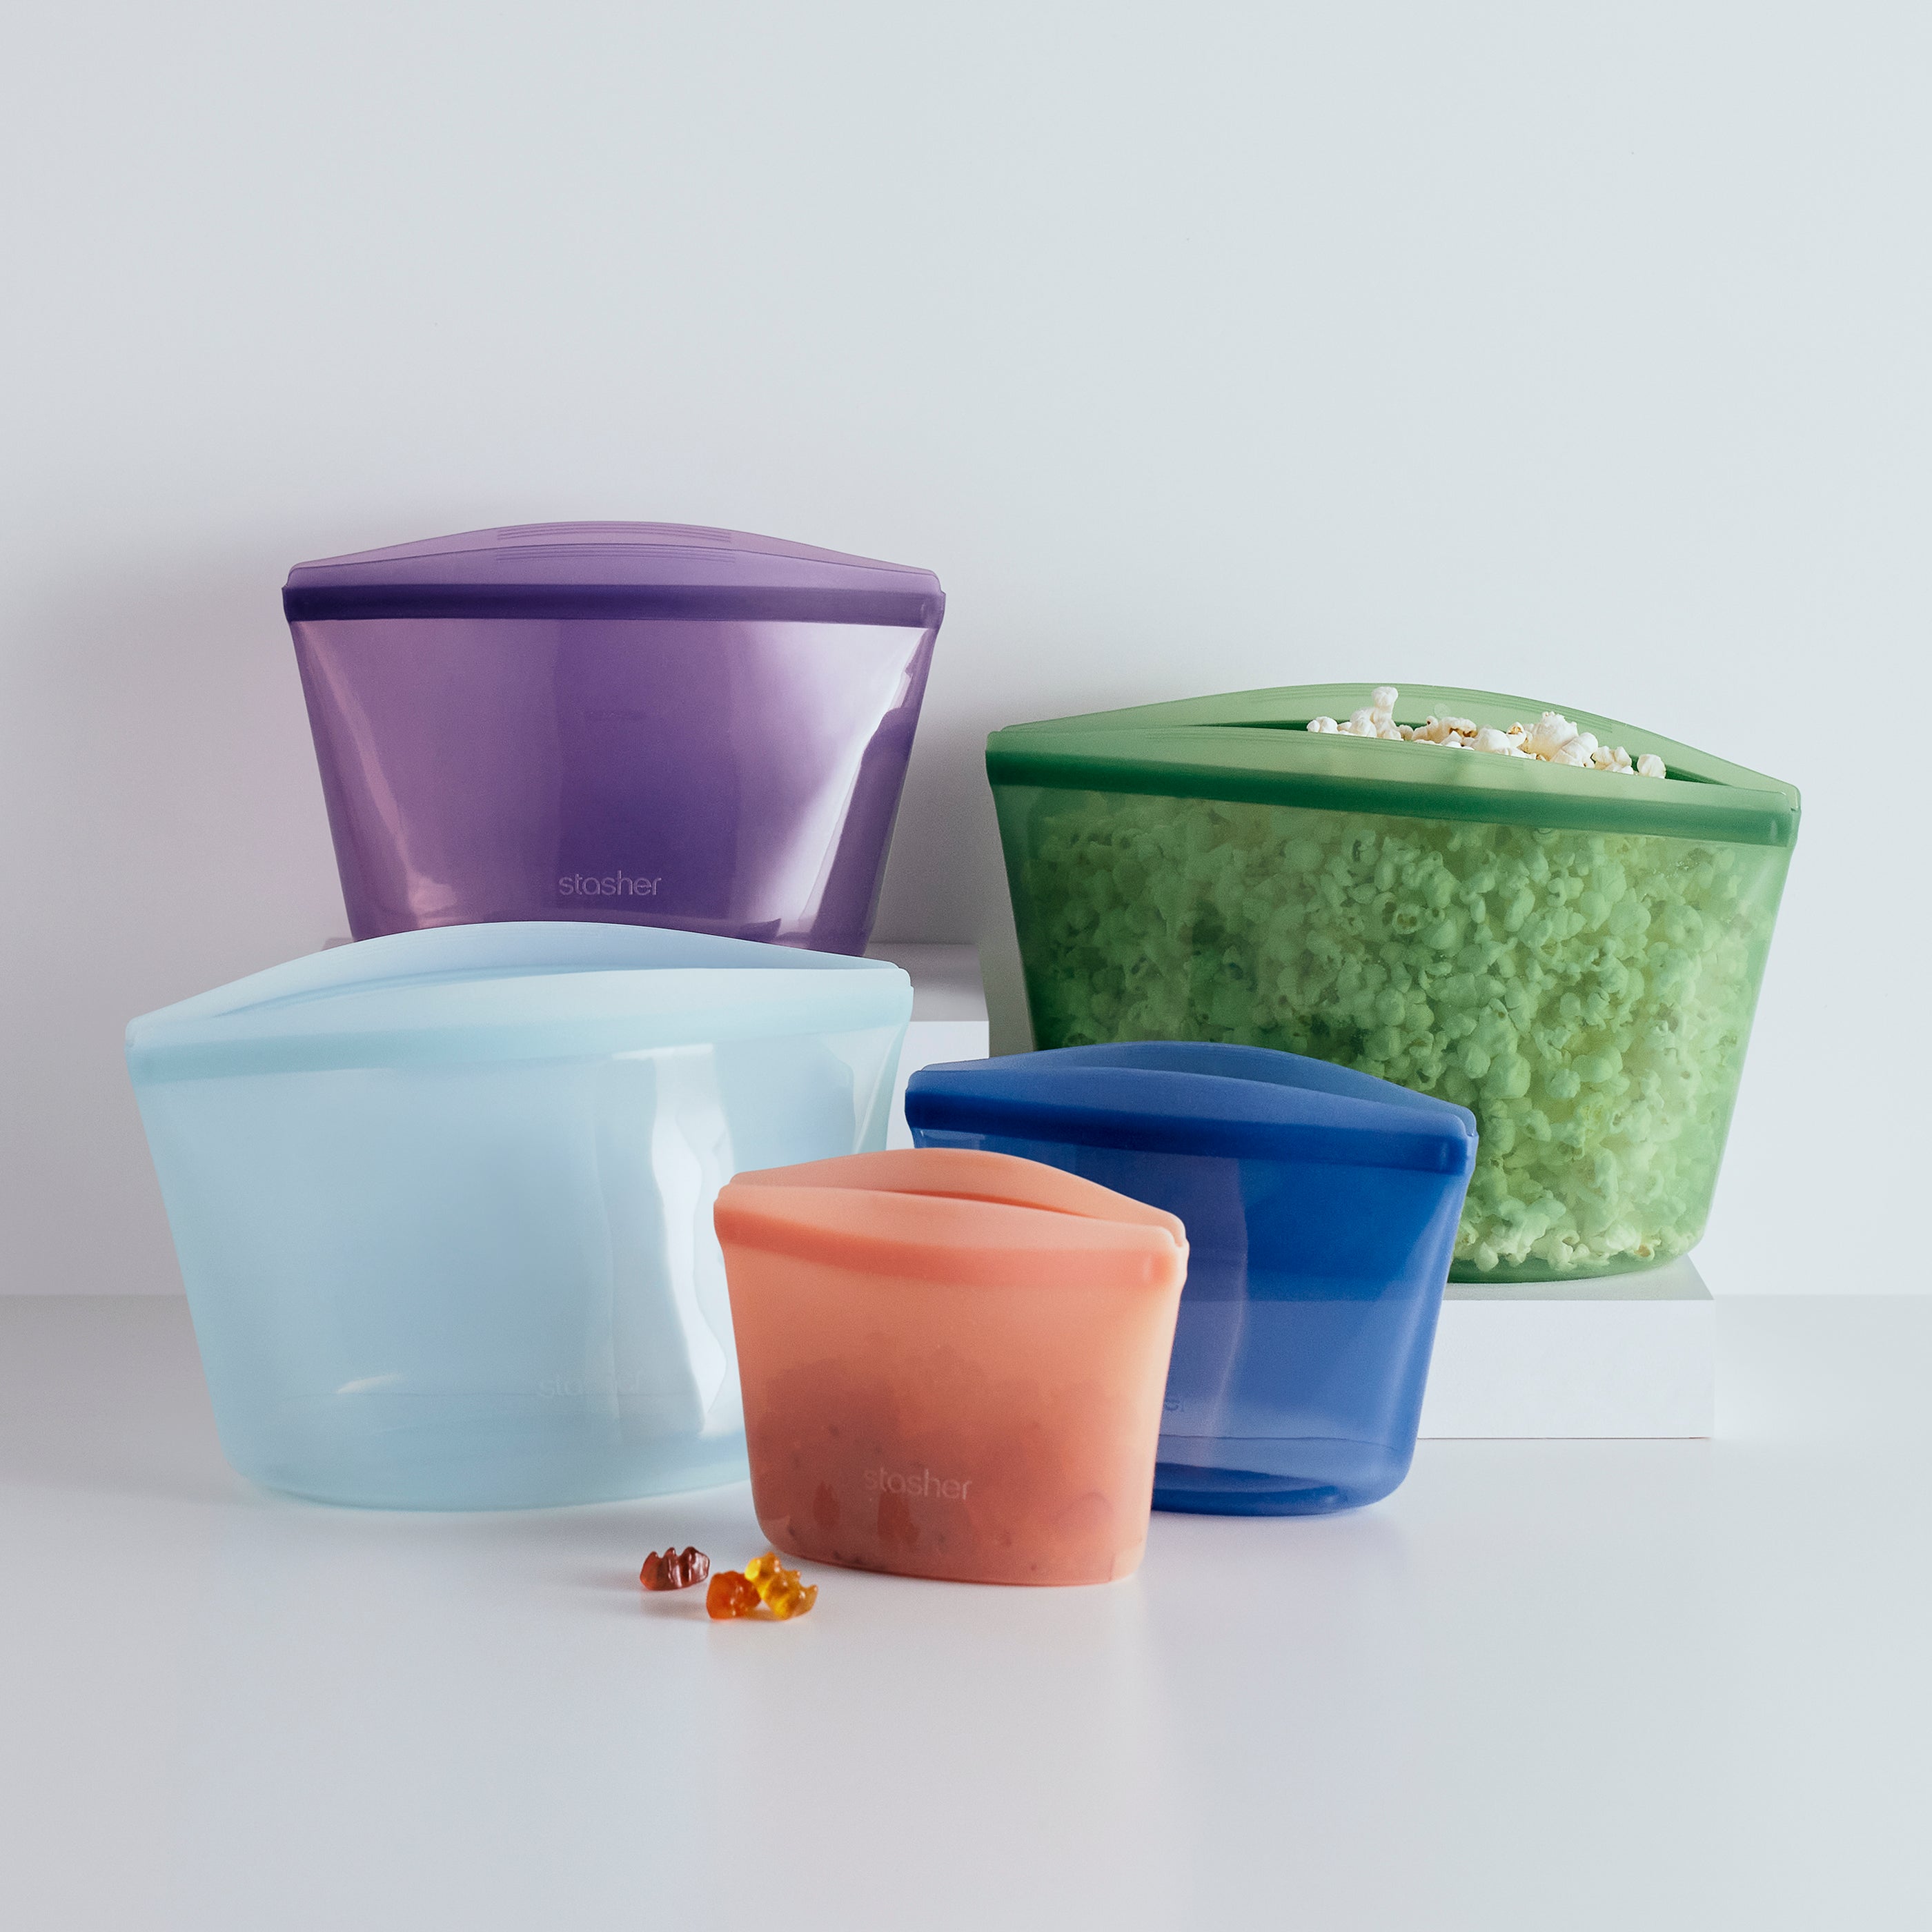 The new Stasher Bowls are a must-buy if you love Stasher Bags